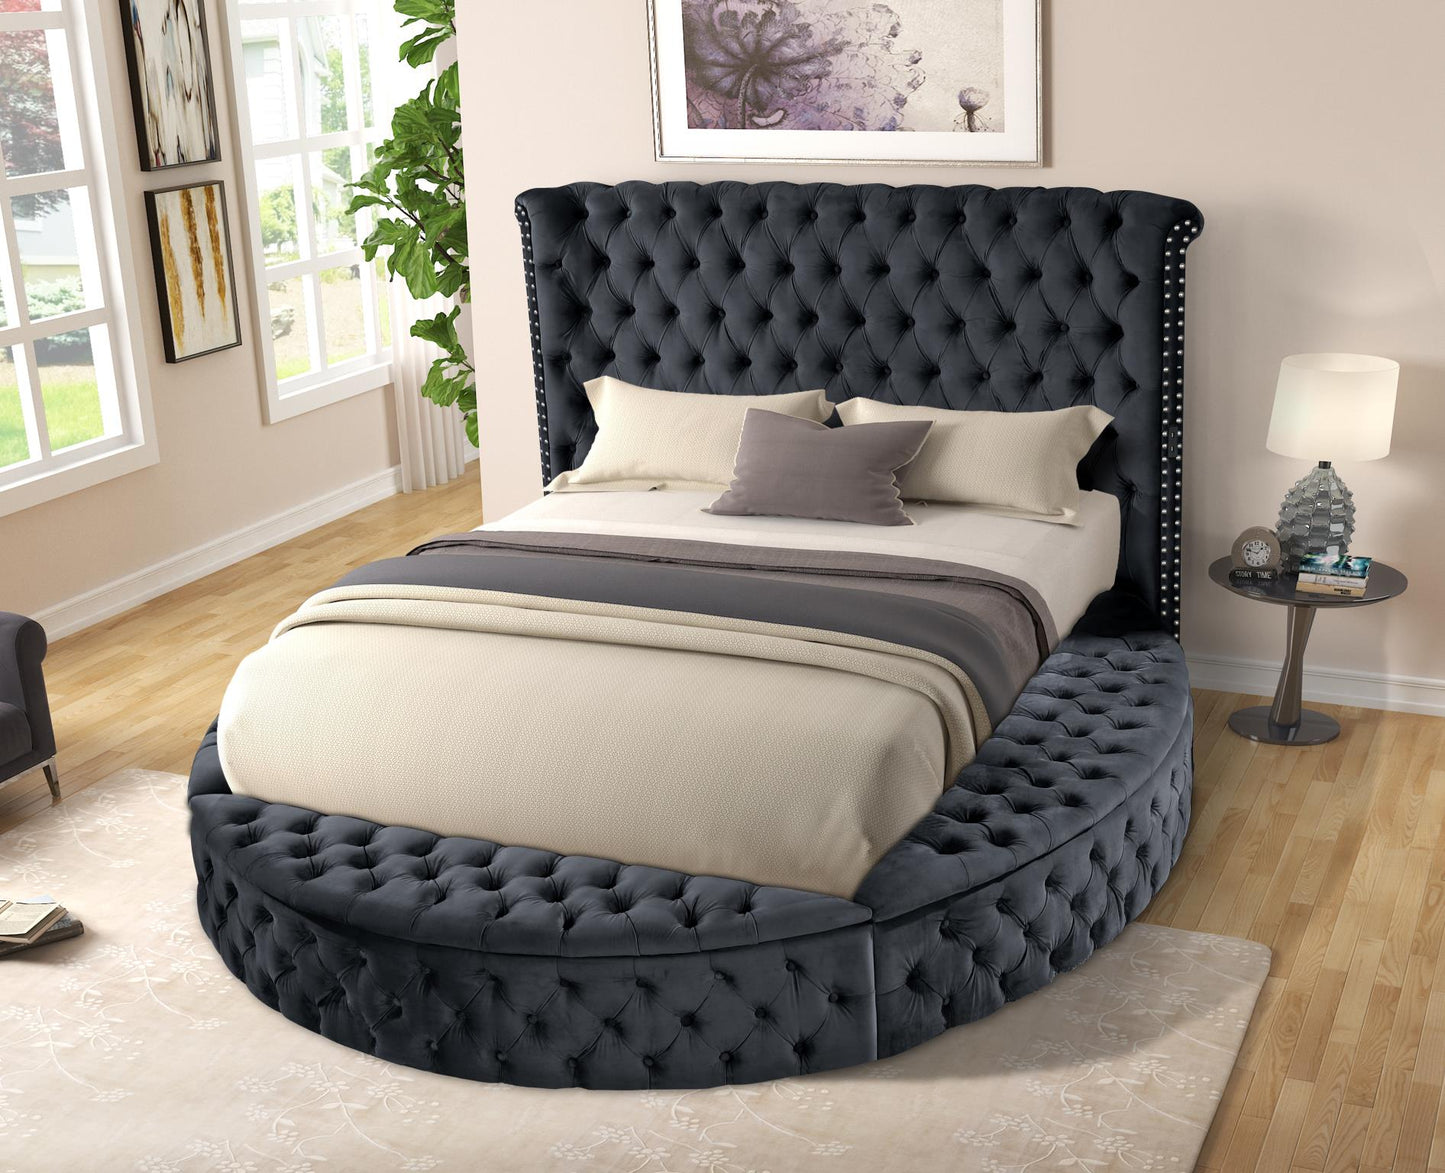 Queen Charcoal Tufted Kingsford Bed w/USB and BT Speakers $1675.00 *90 Day Same as Cash